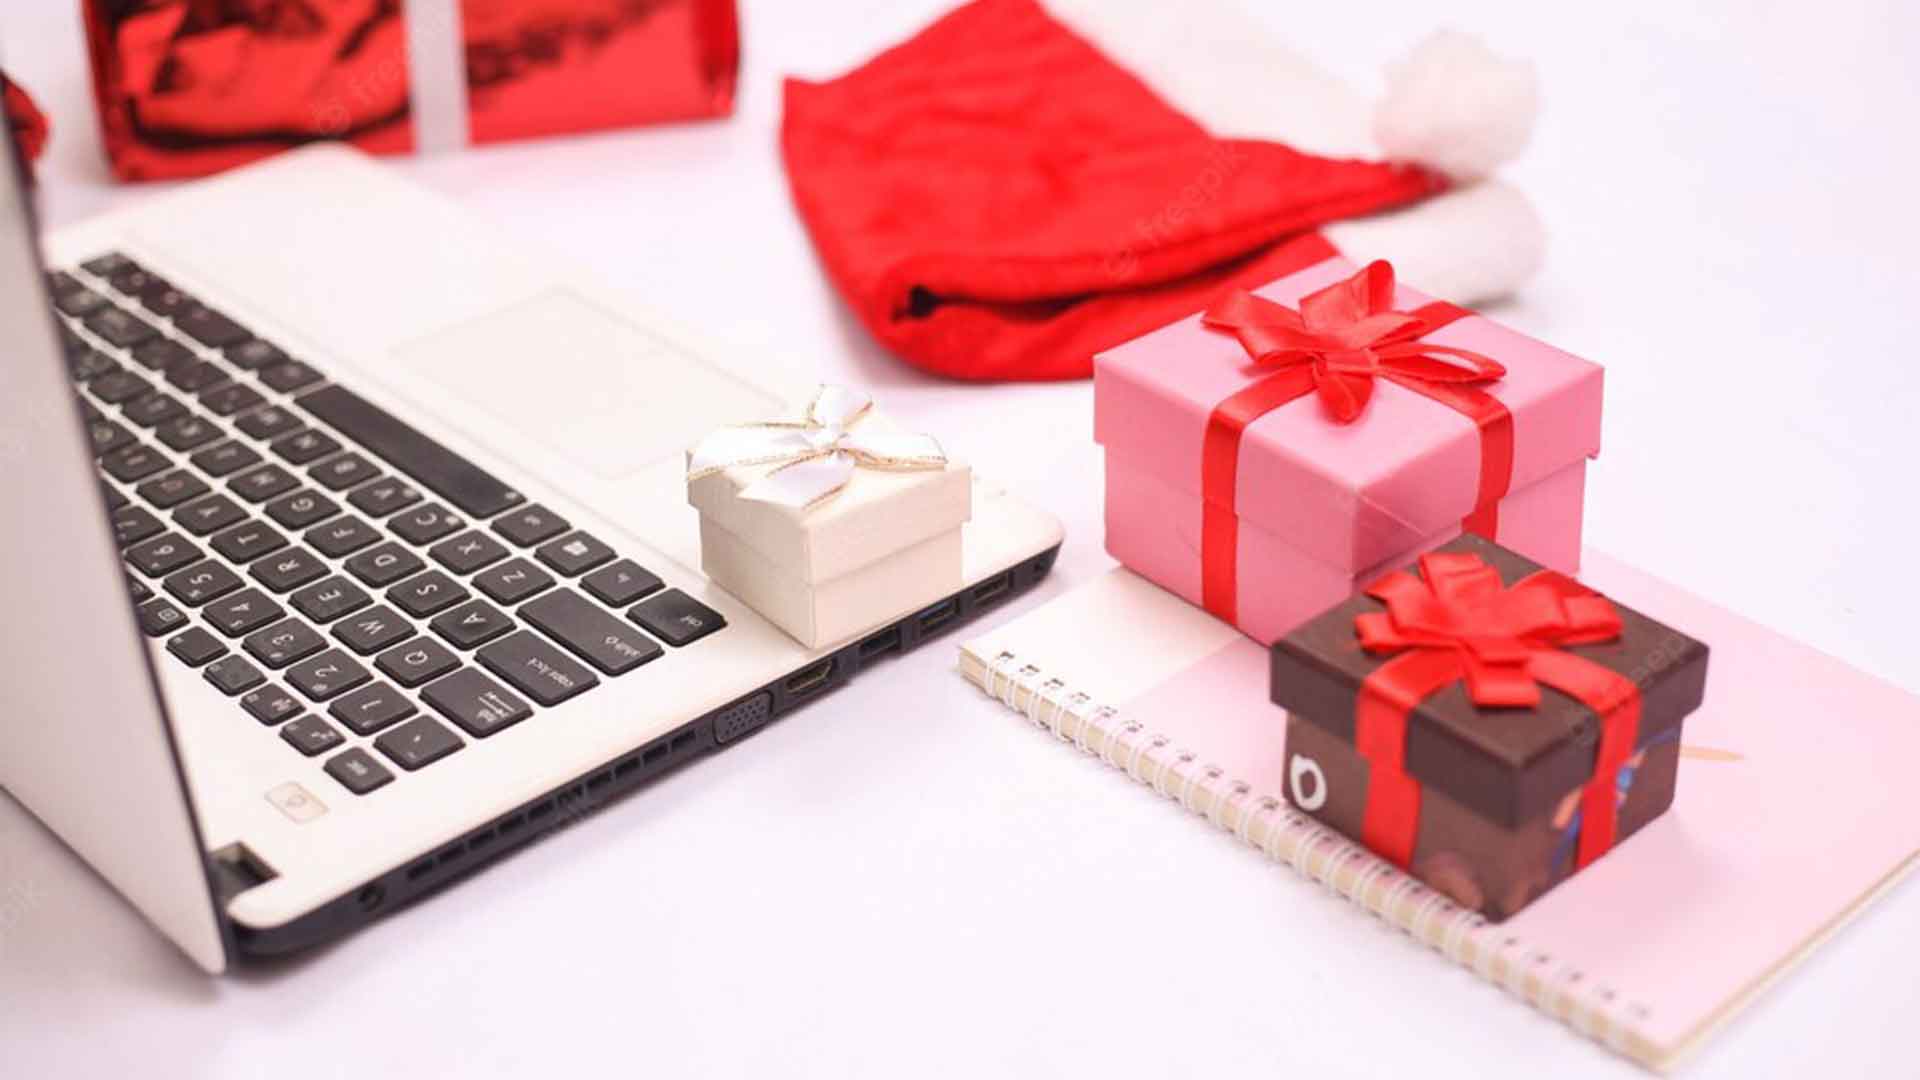 6 Best Laptops To Gift To A Graphic Designer This Festive Season